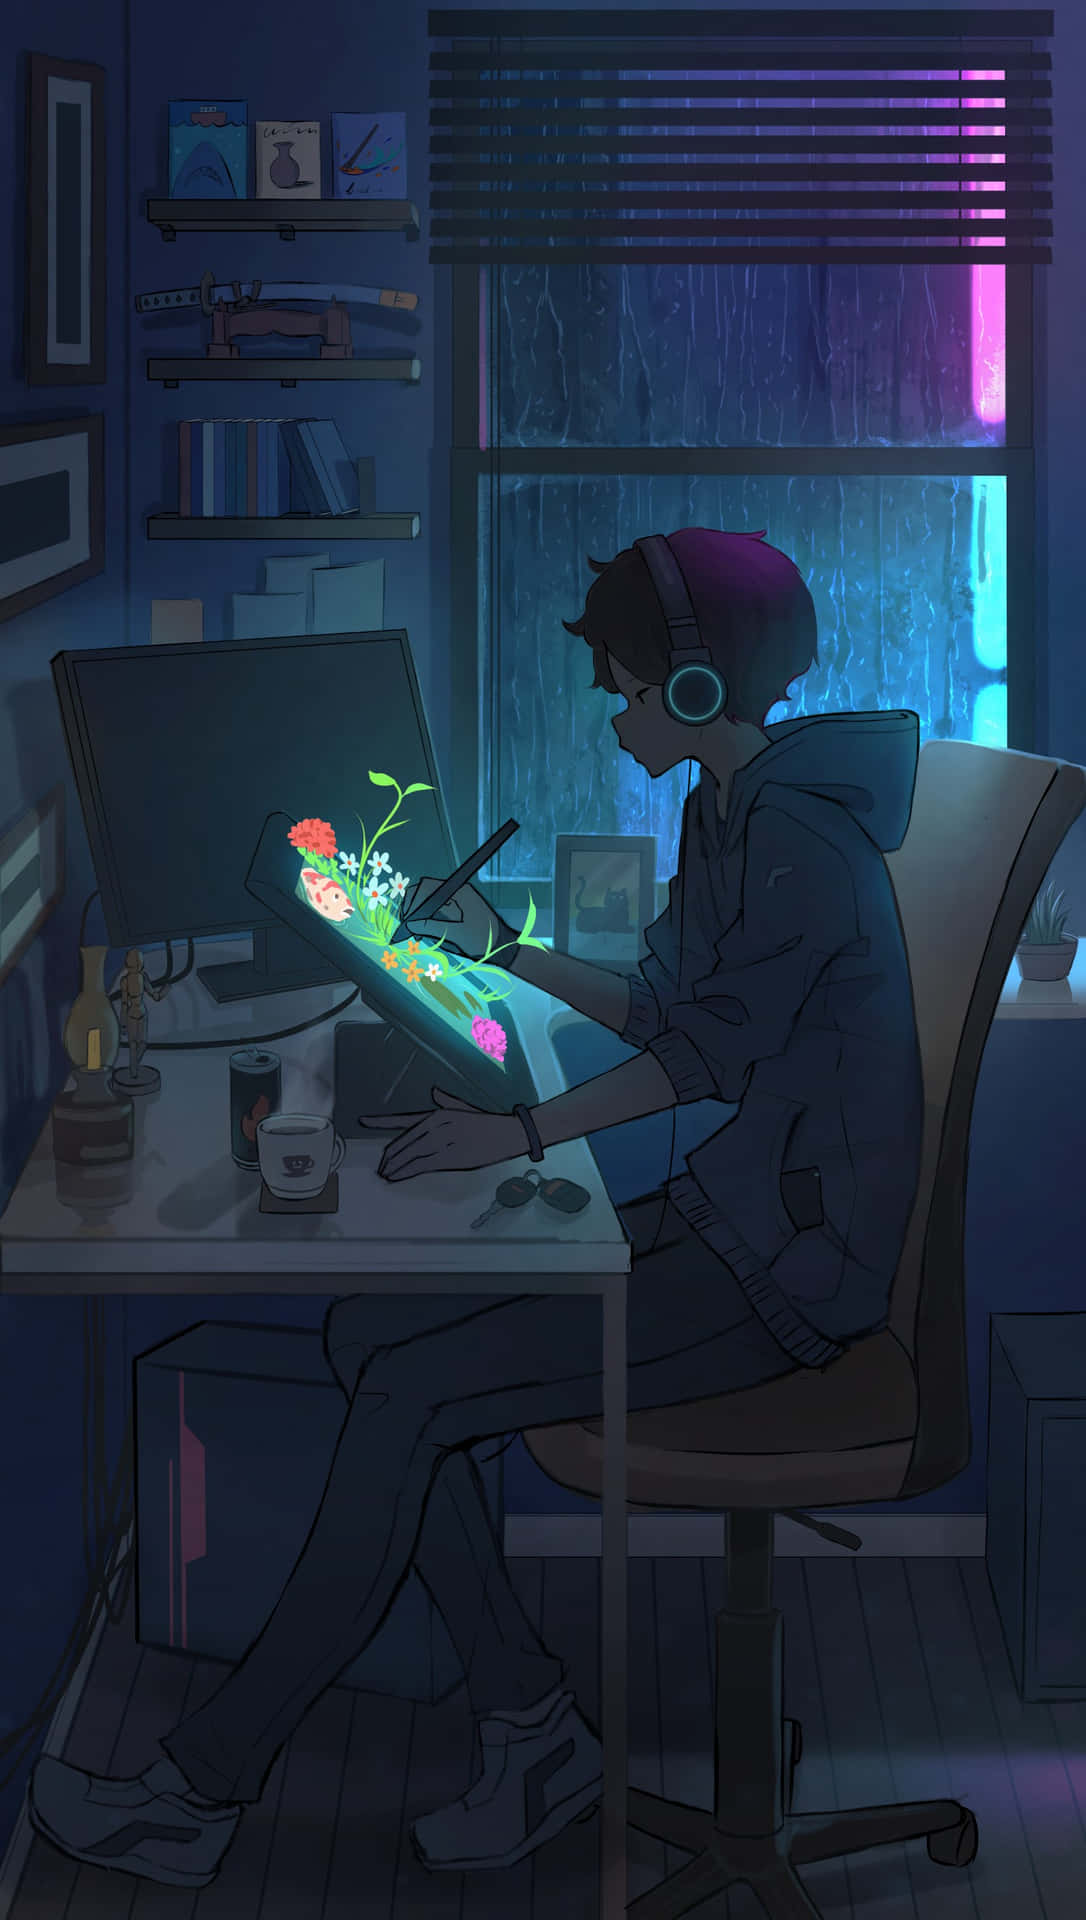 A man in an anime-style outfit working away at his computer Wallpaper